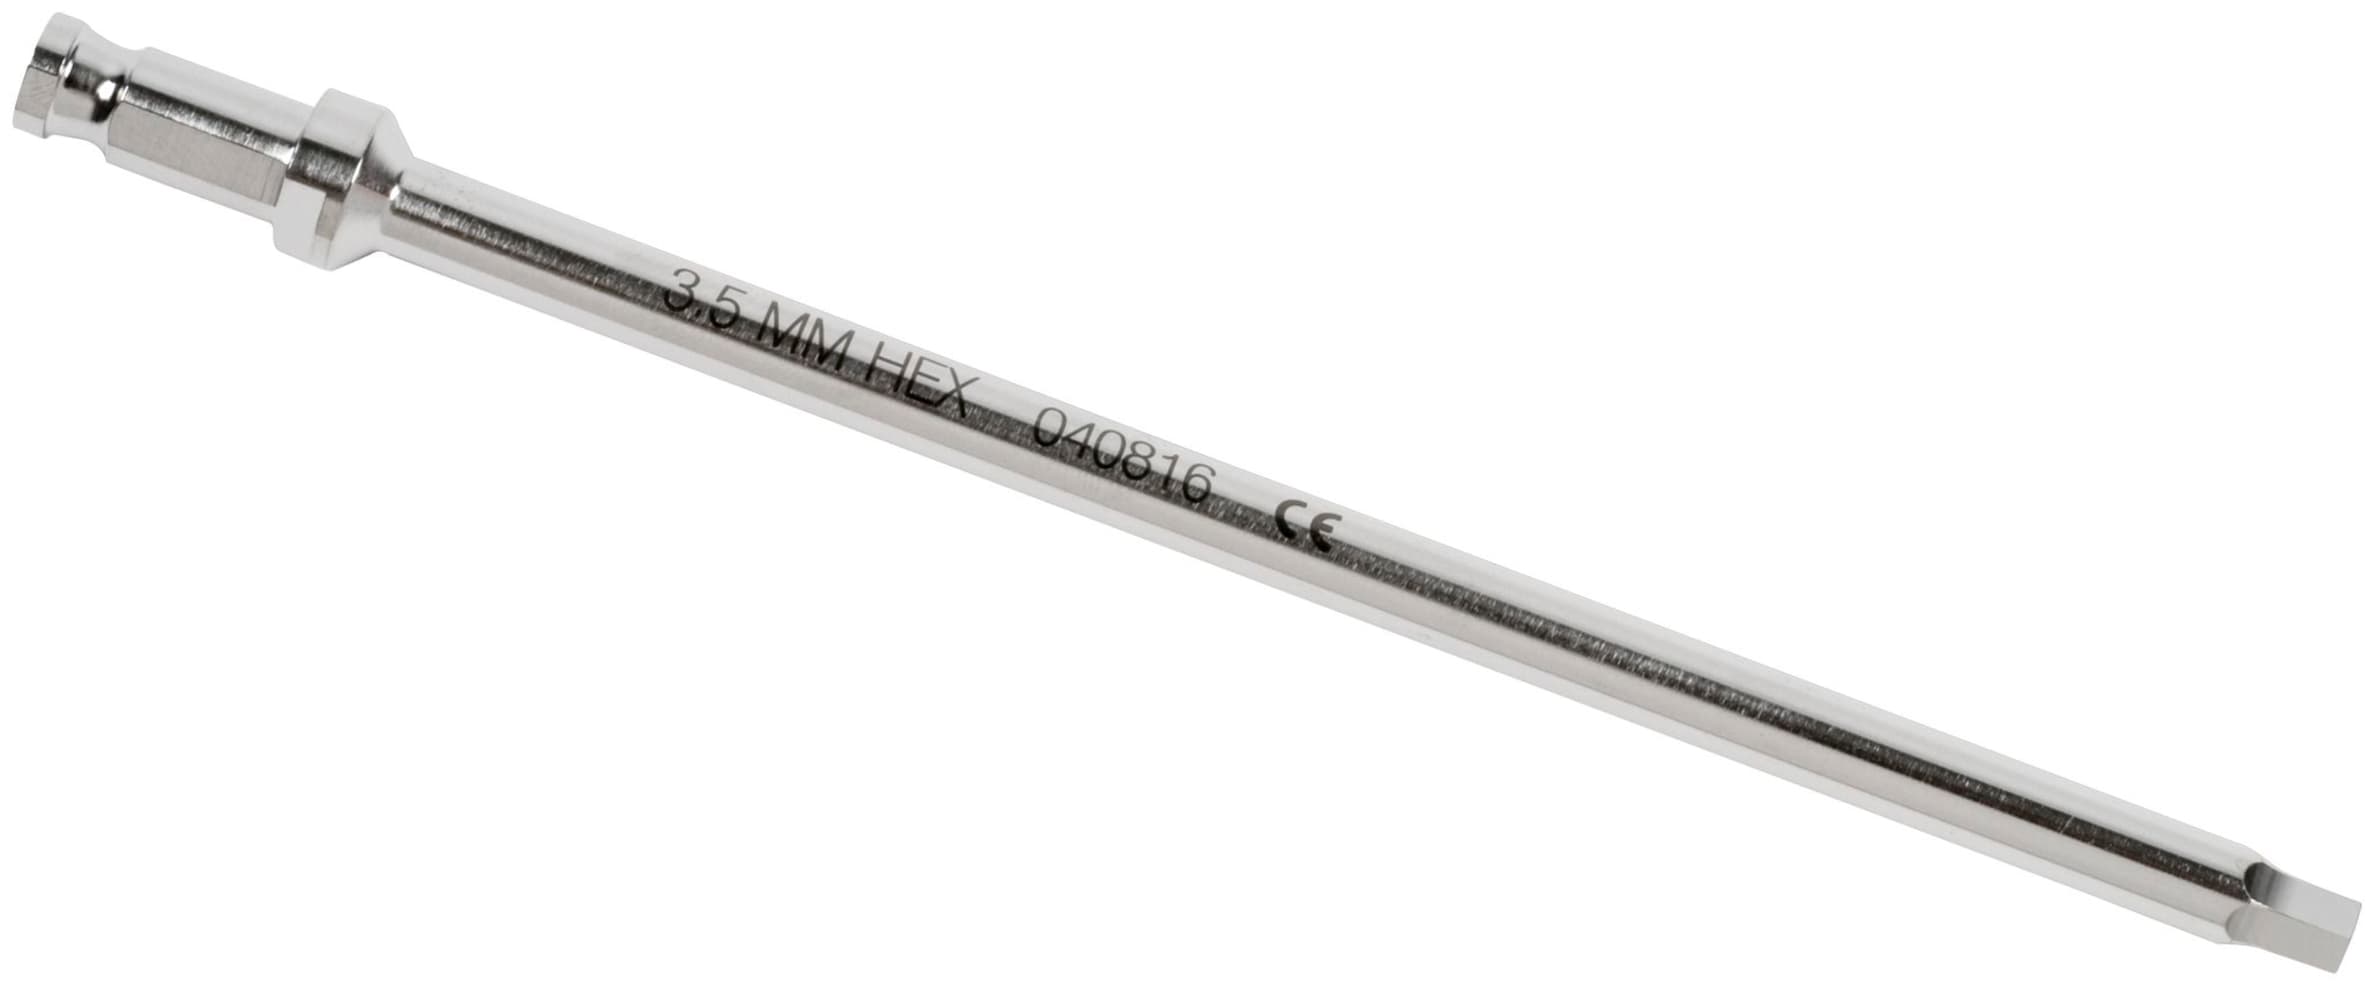 Driver, 3.5 mm Hex Cannulated (Mini Hudson)